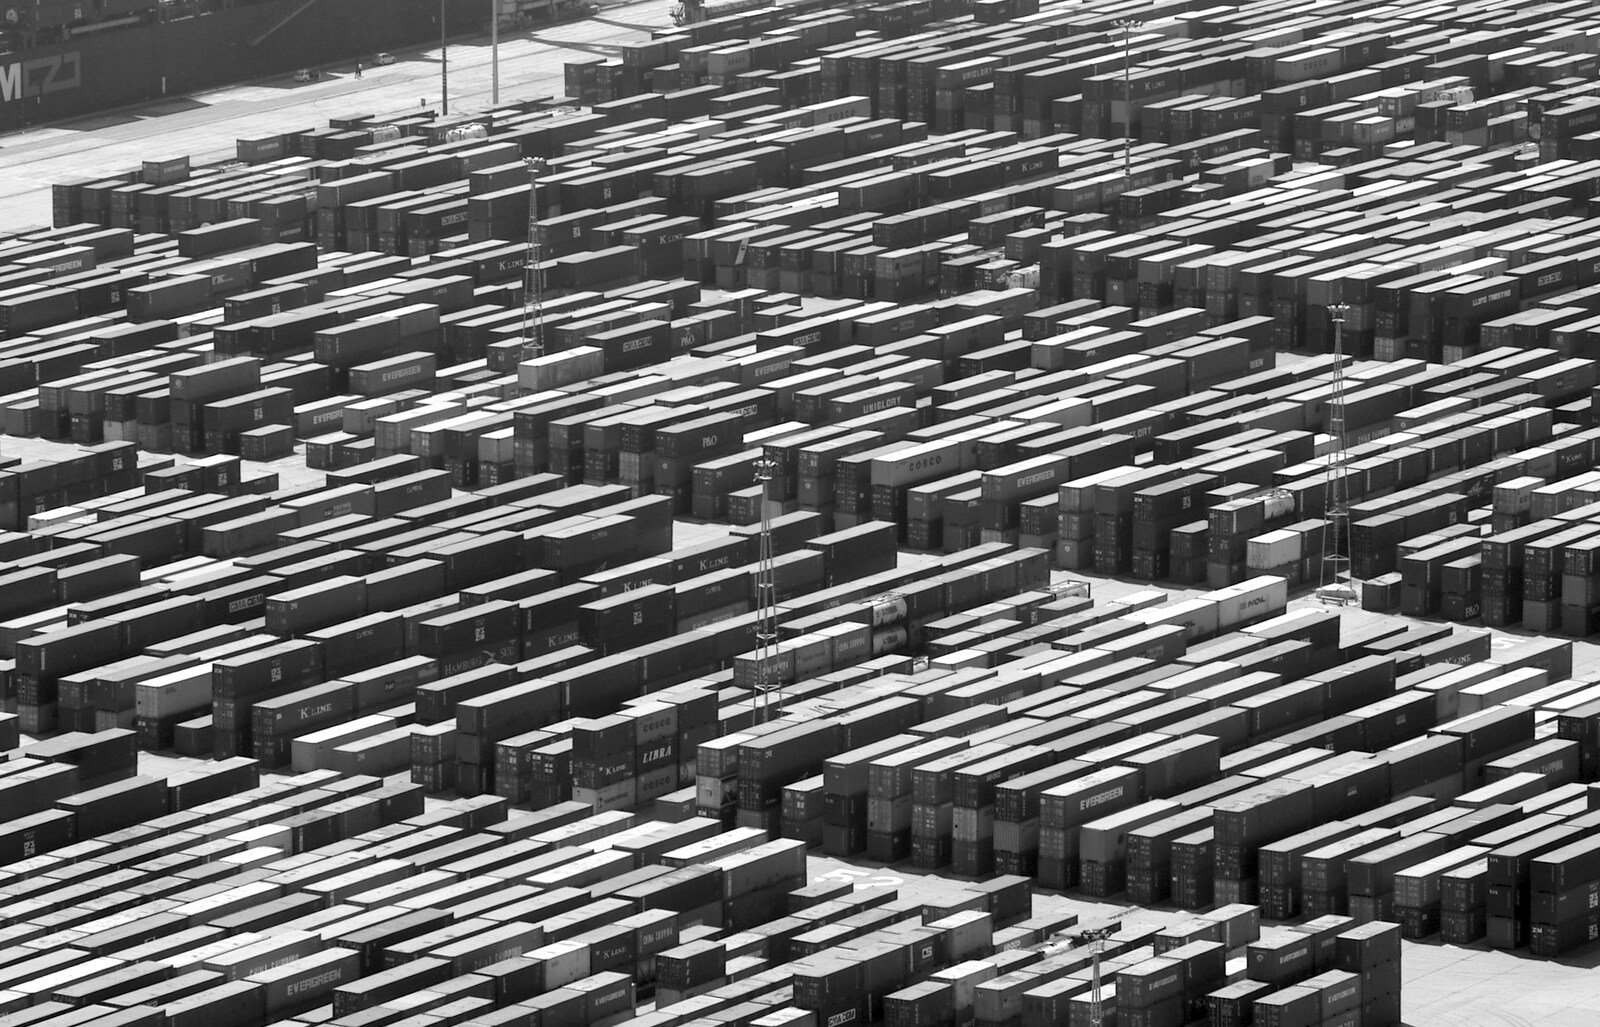 Thousands of containers lined up on the dockside from Montjuïc and Sant Feliu de Guíxols, Barcelona, Catalunya - 30th April 2005